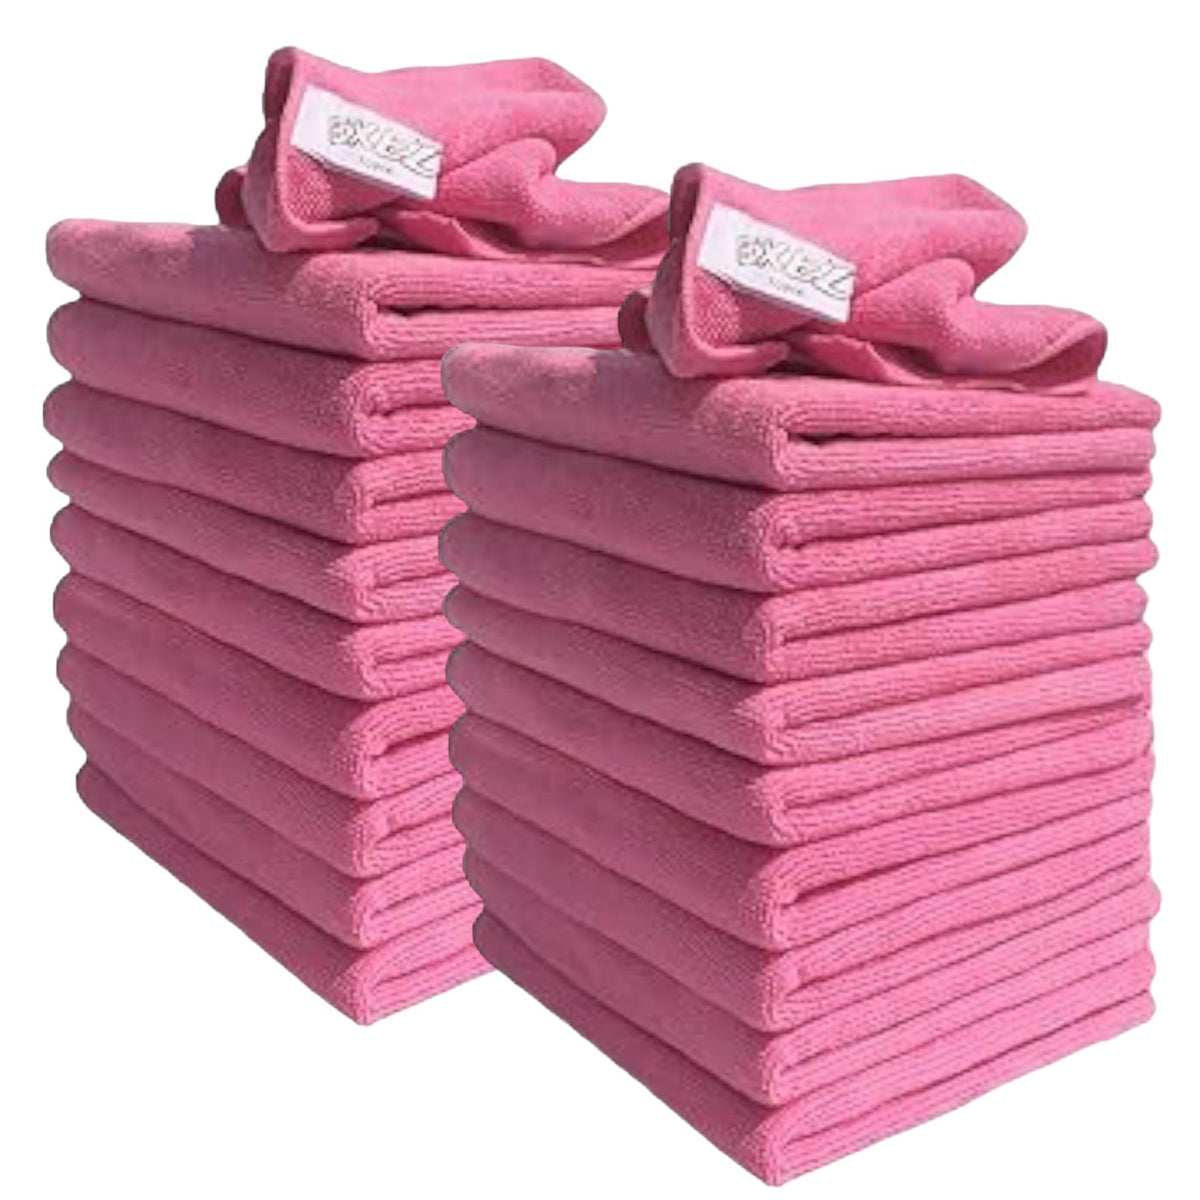 20 Pink Exel Microfibre Cloths, Lint Free, For Polishing, Washing, Waxing And Dusting